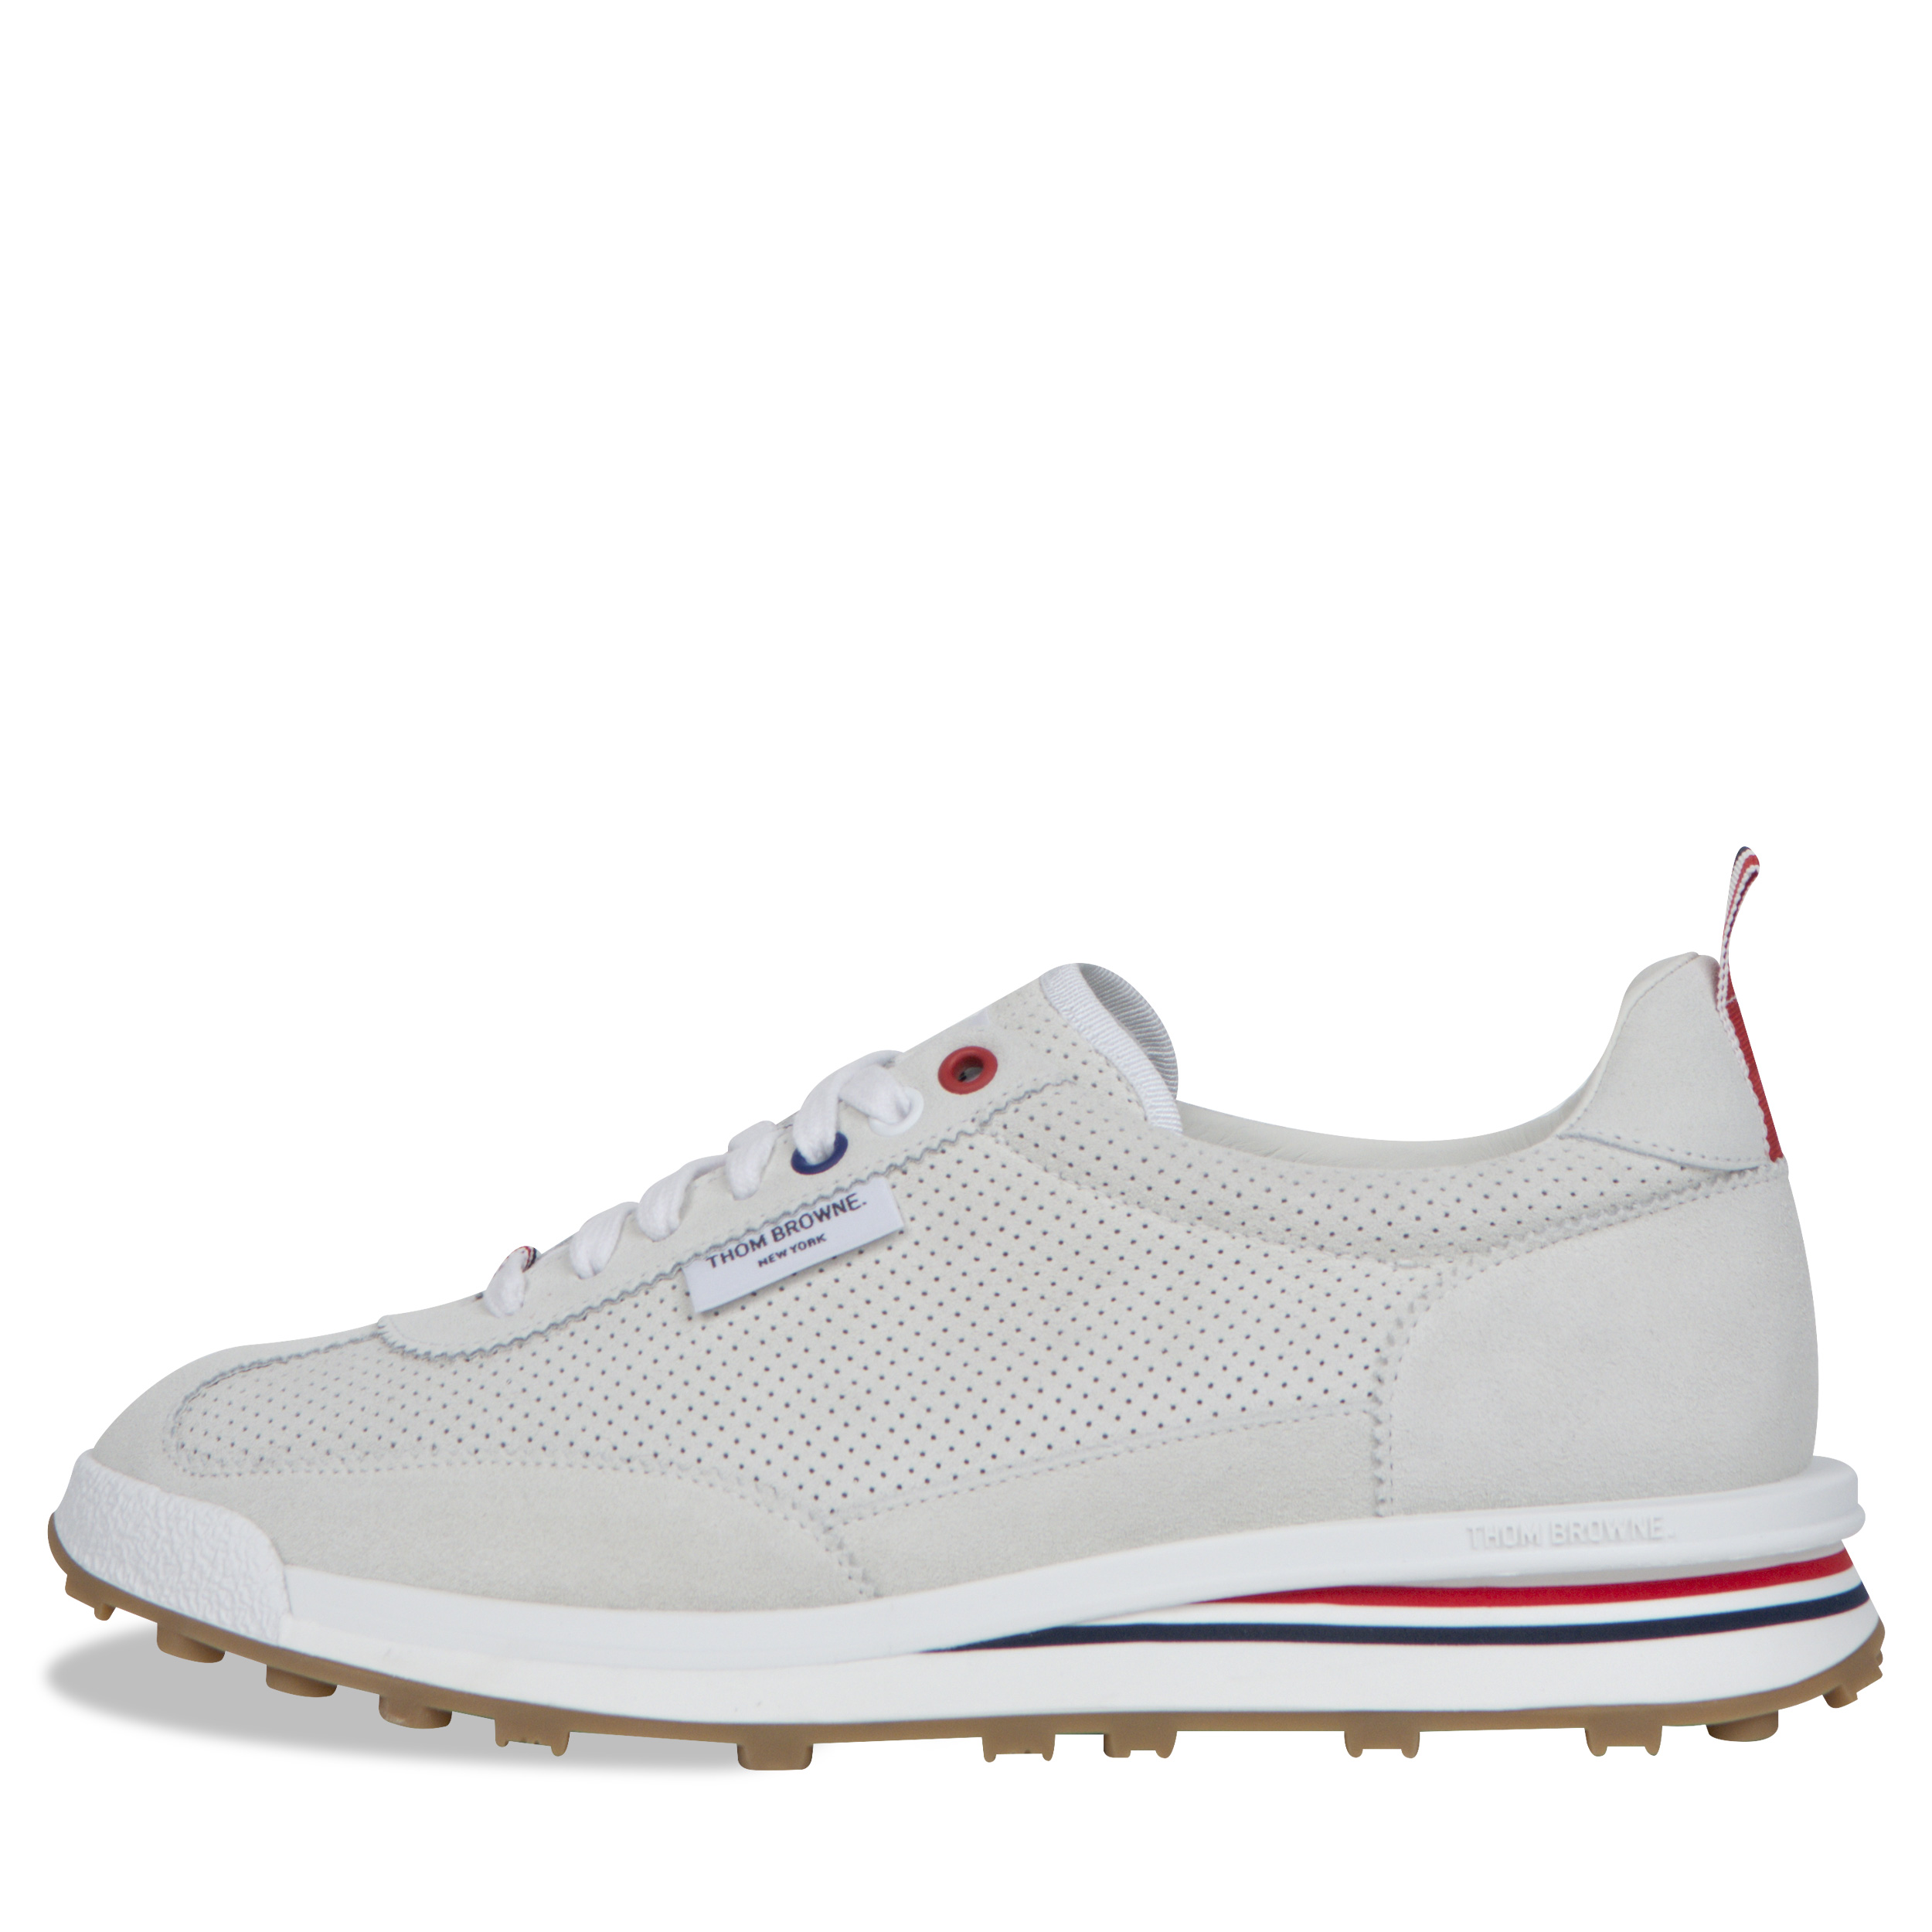 Thom Browne ’Tech Runner’ Suede Trainers White